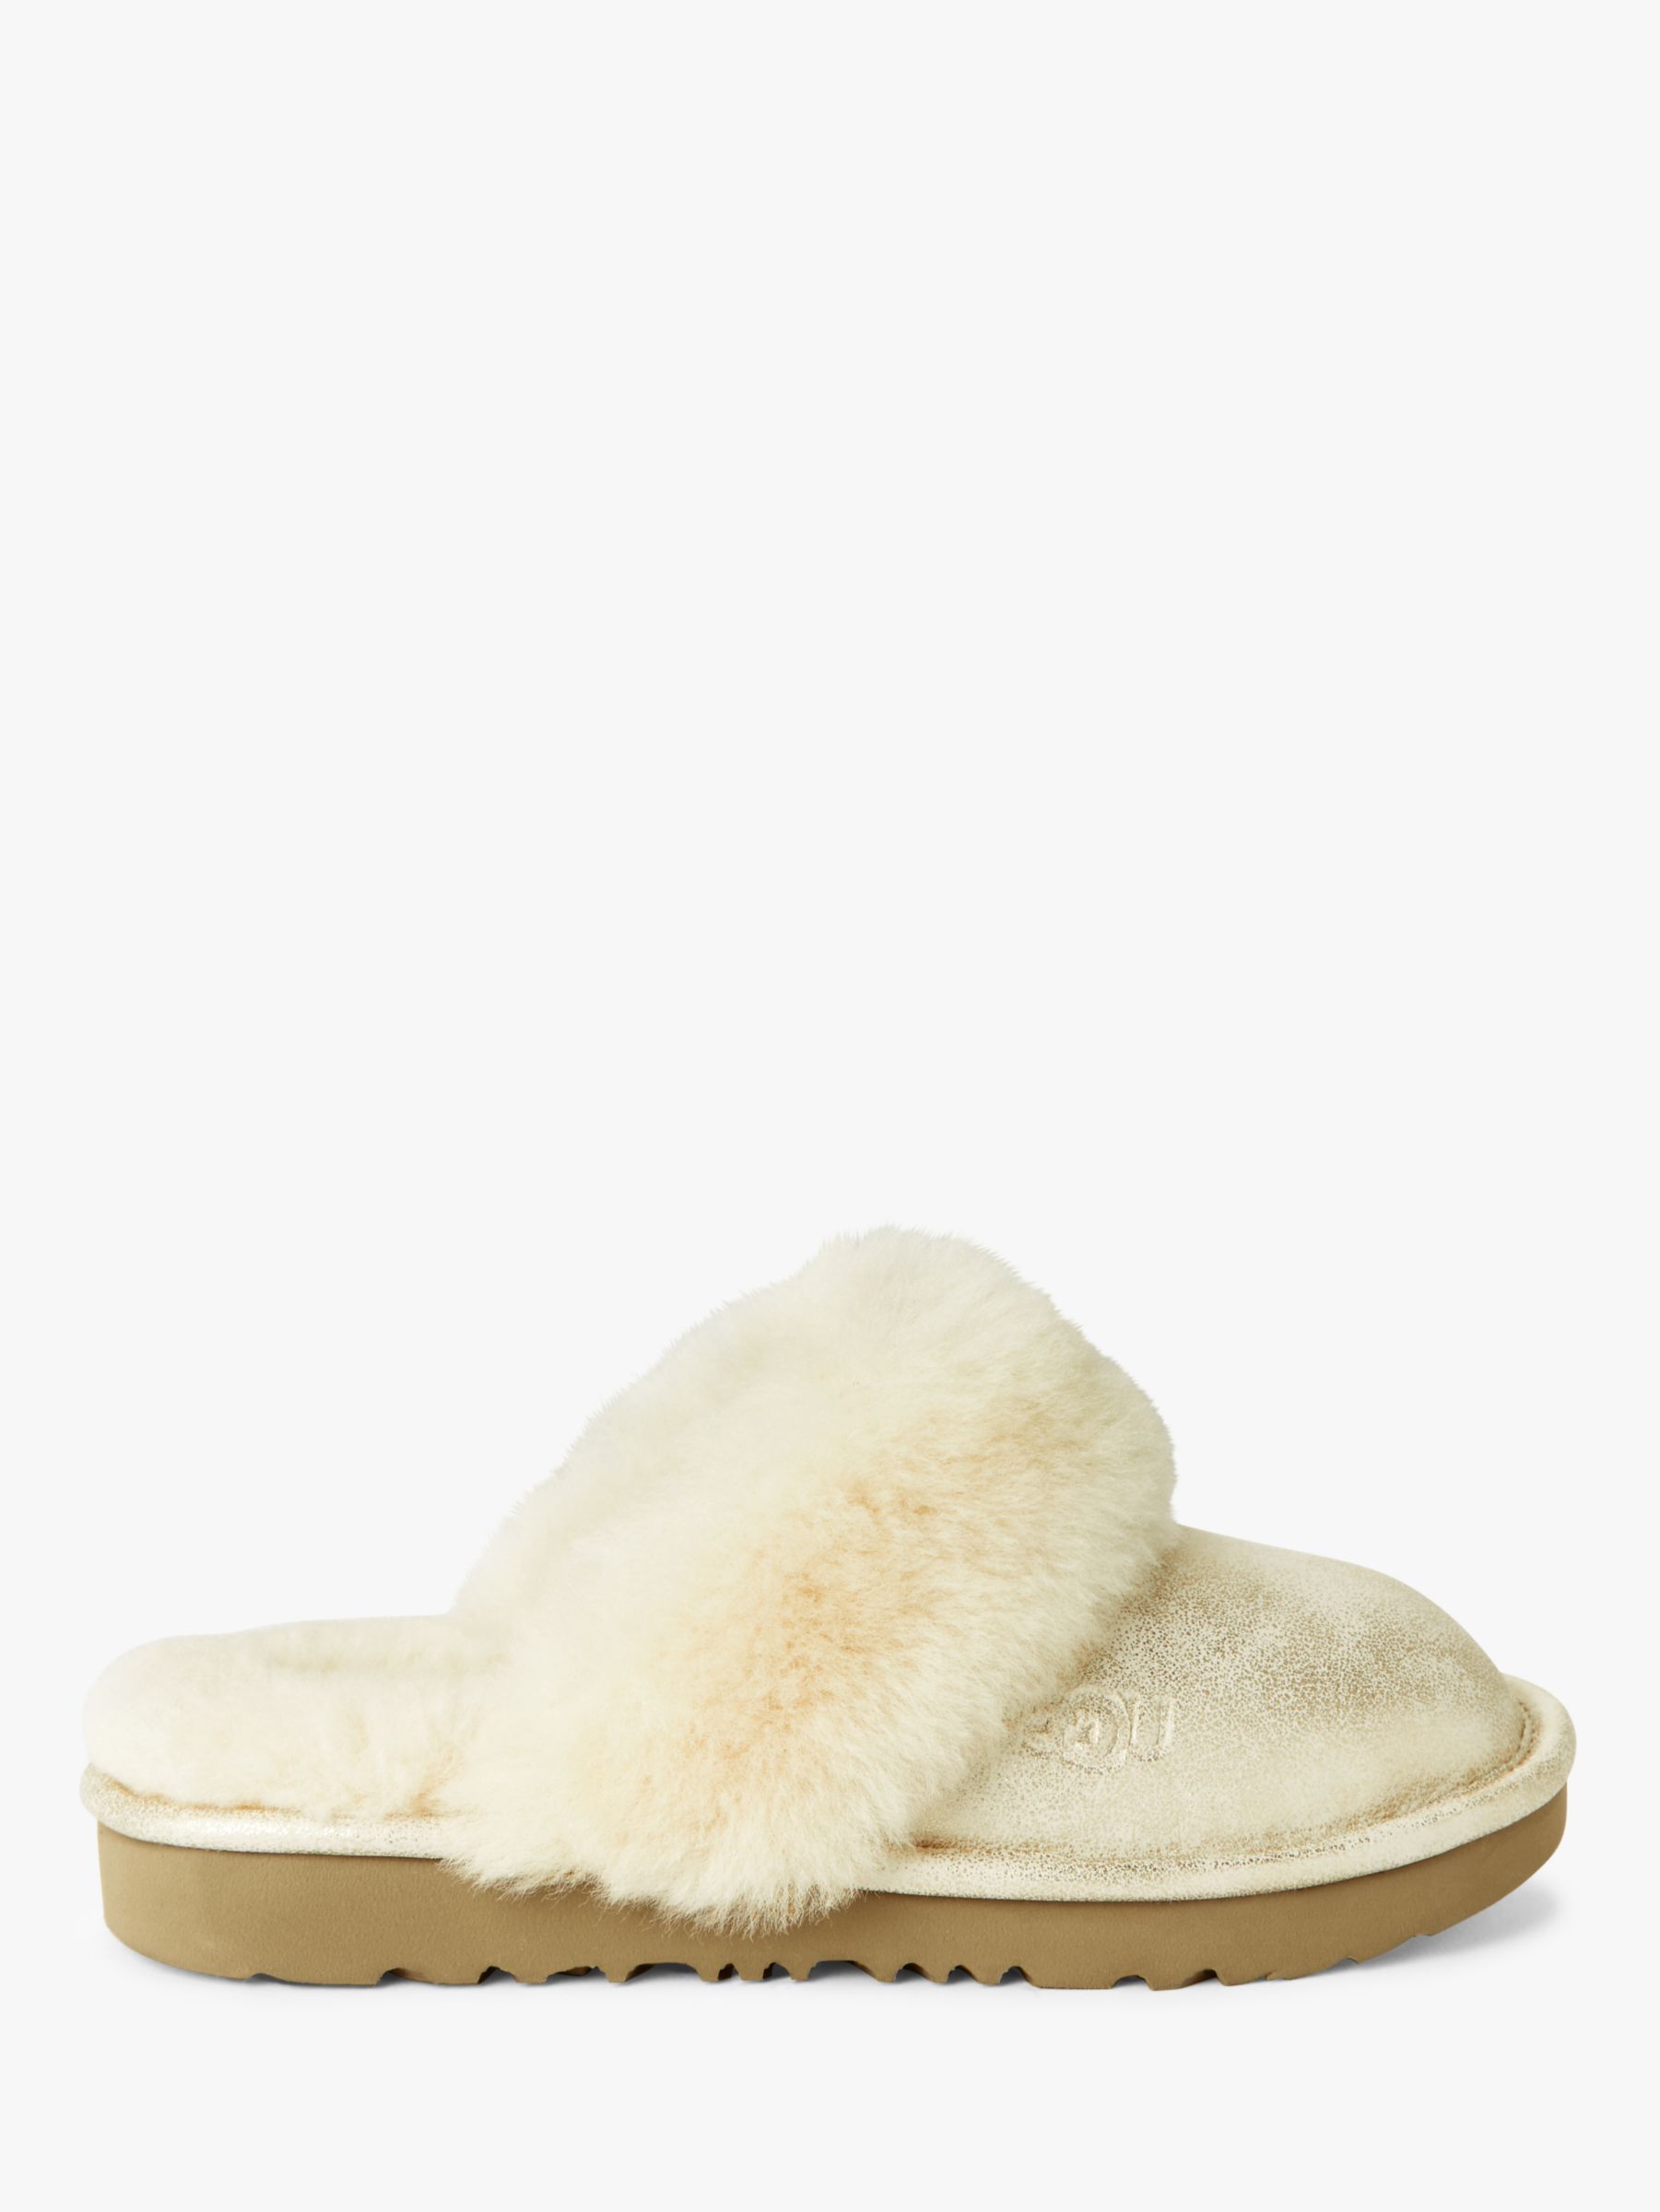 ugg gold slippers